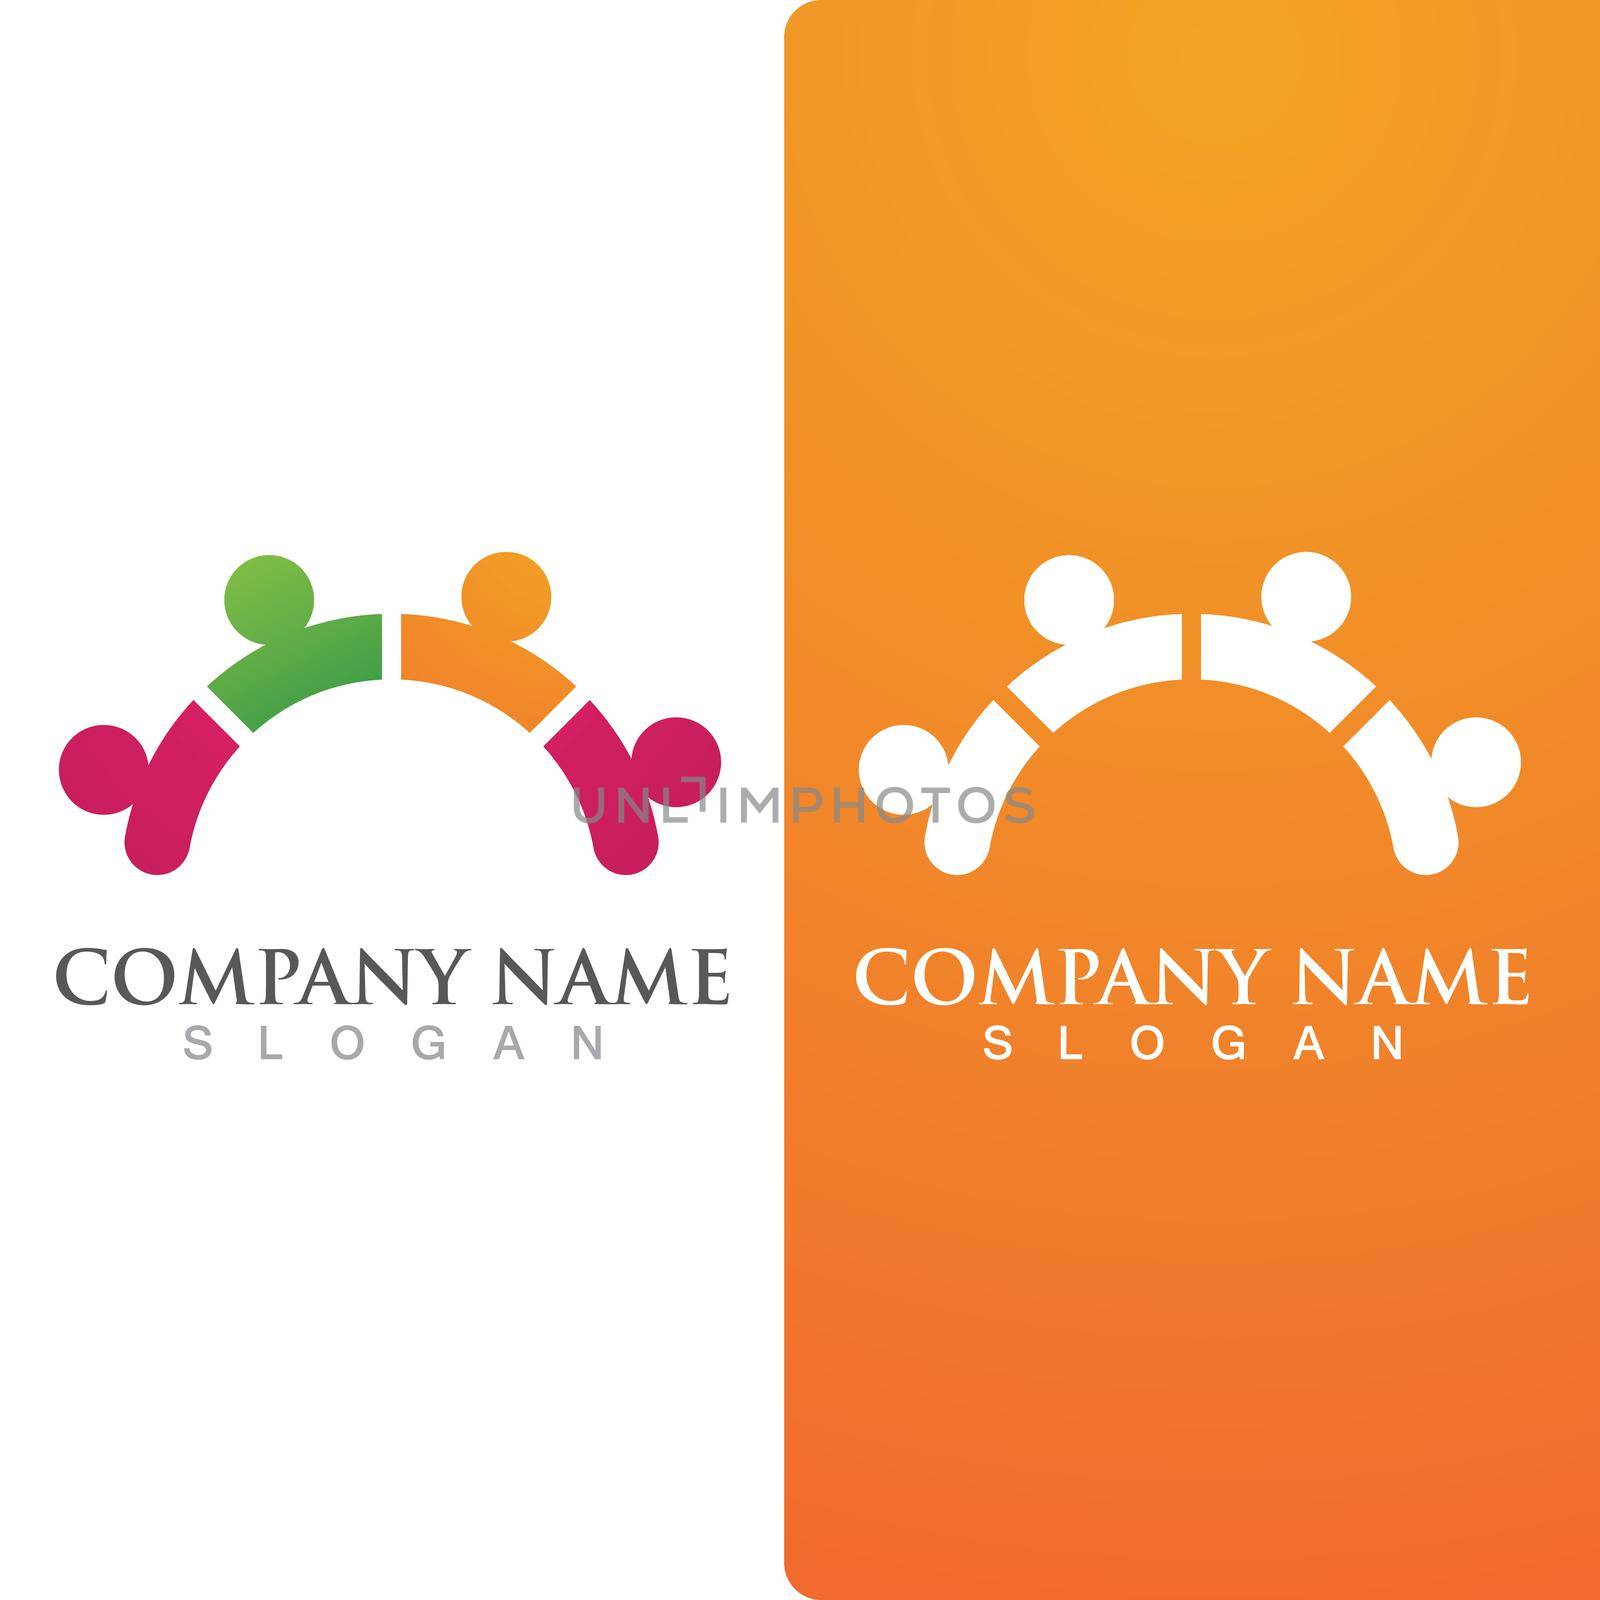 Community group logo, network and social icon by Mrsongrphc